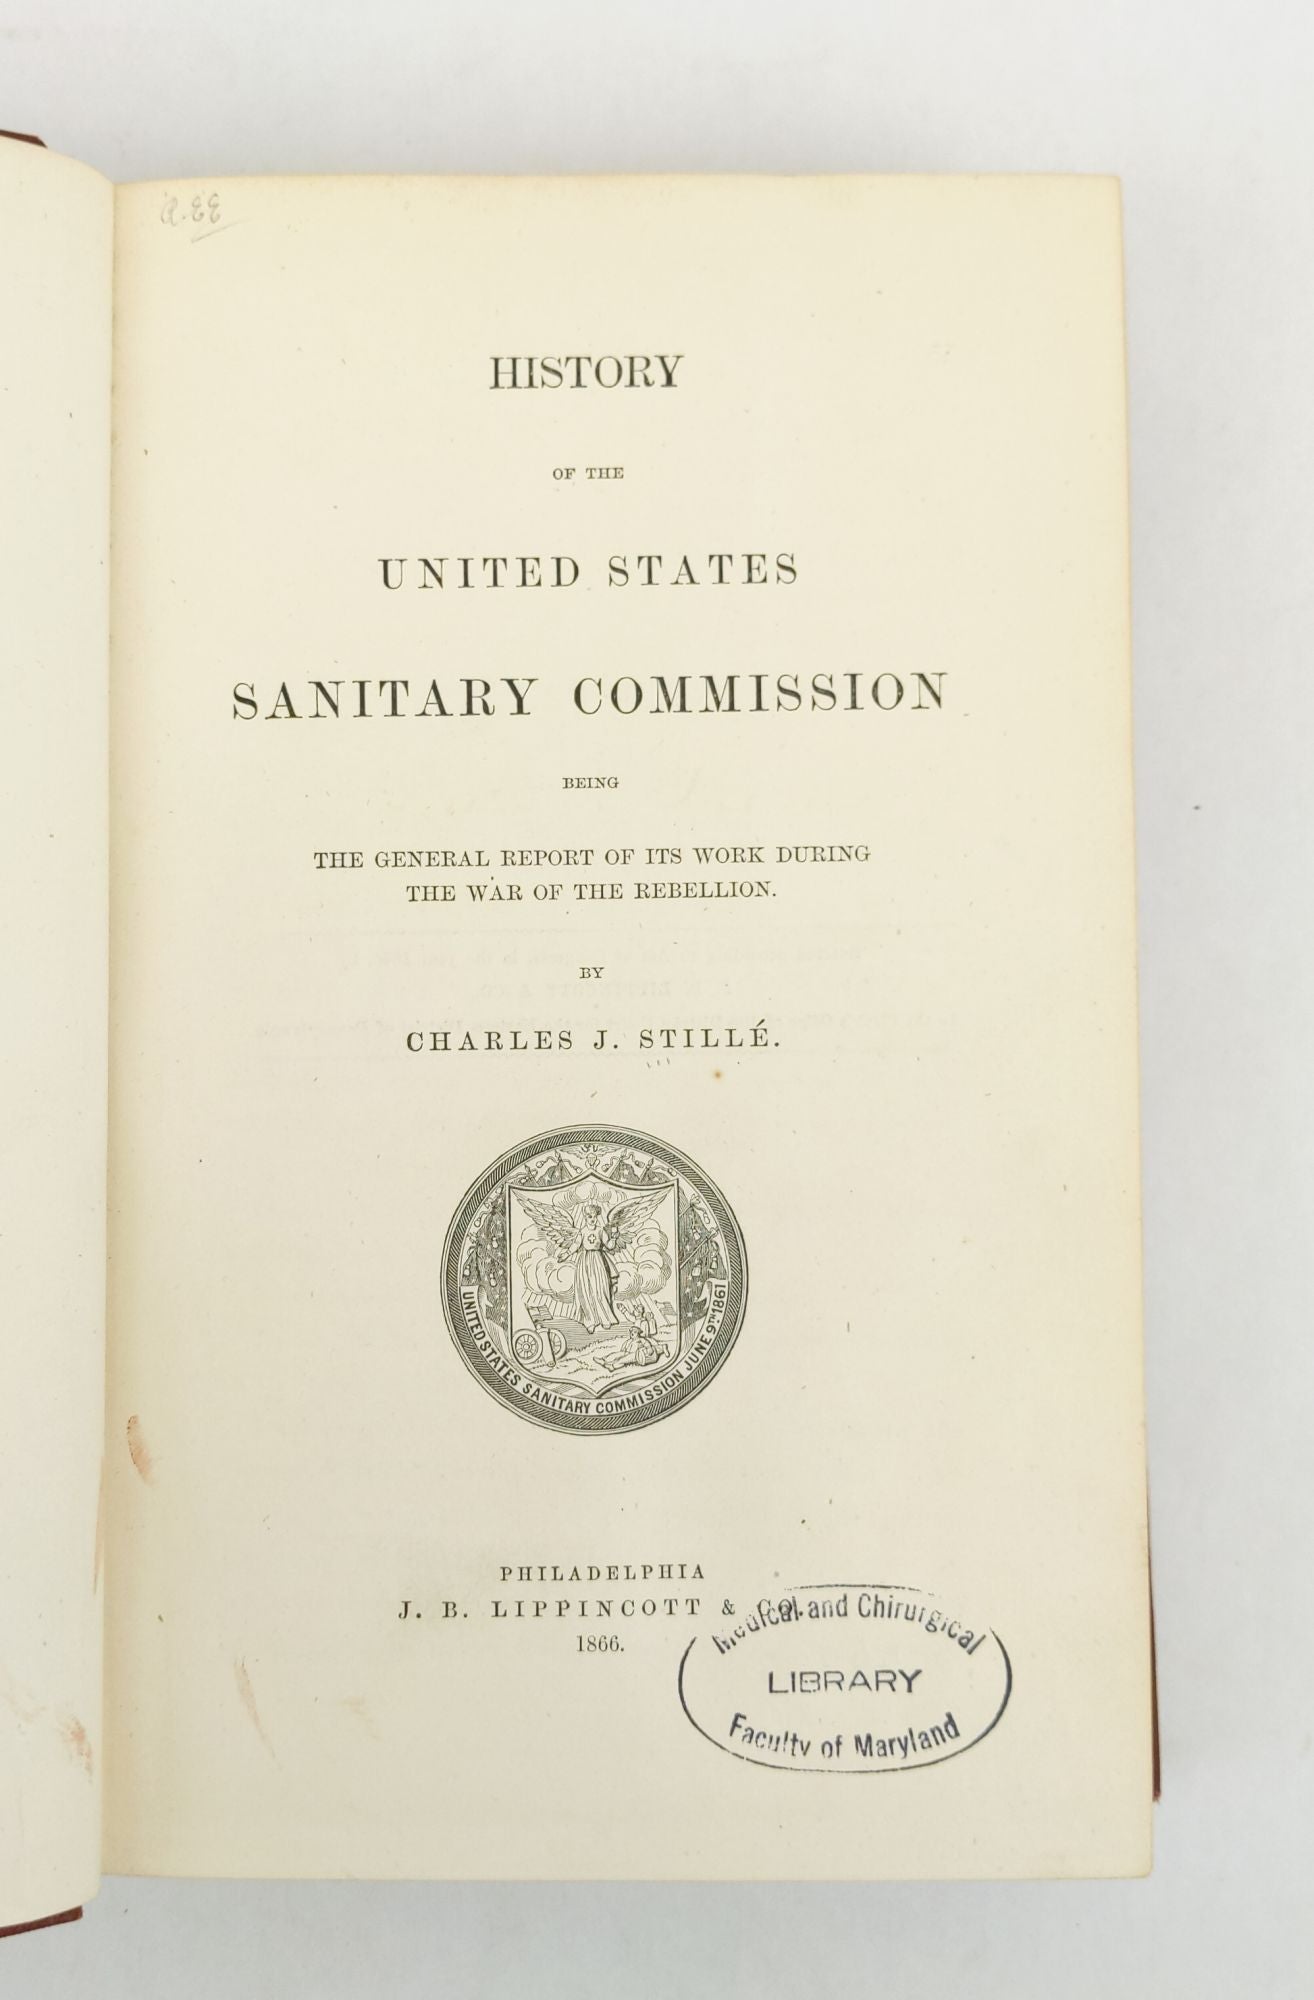 Product Image for HISTORY OF THE UNITED STATES SANITARY COMMISSION, BEING THE GENERAL REPORT OF ITS WORK DURING THE WAR OF THE REBELLION [Association Copy]